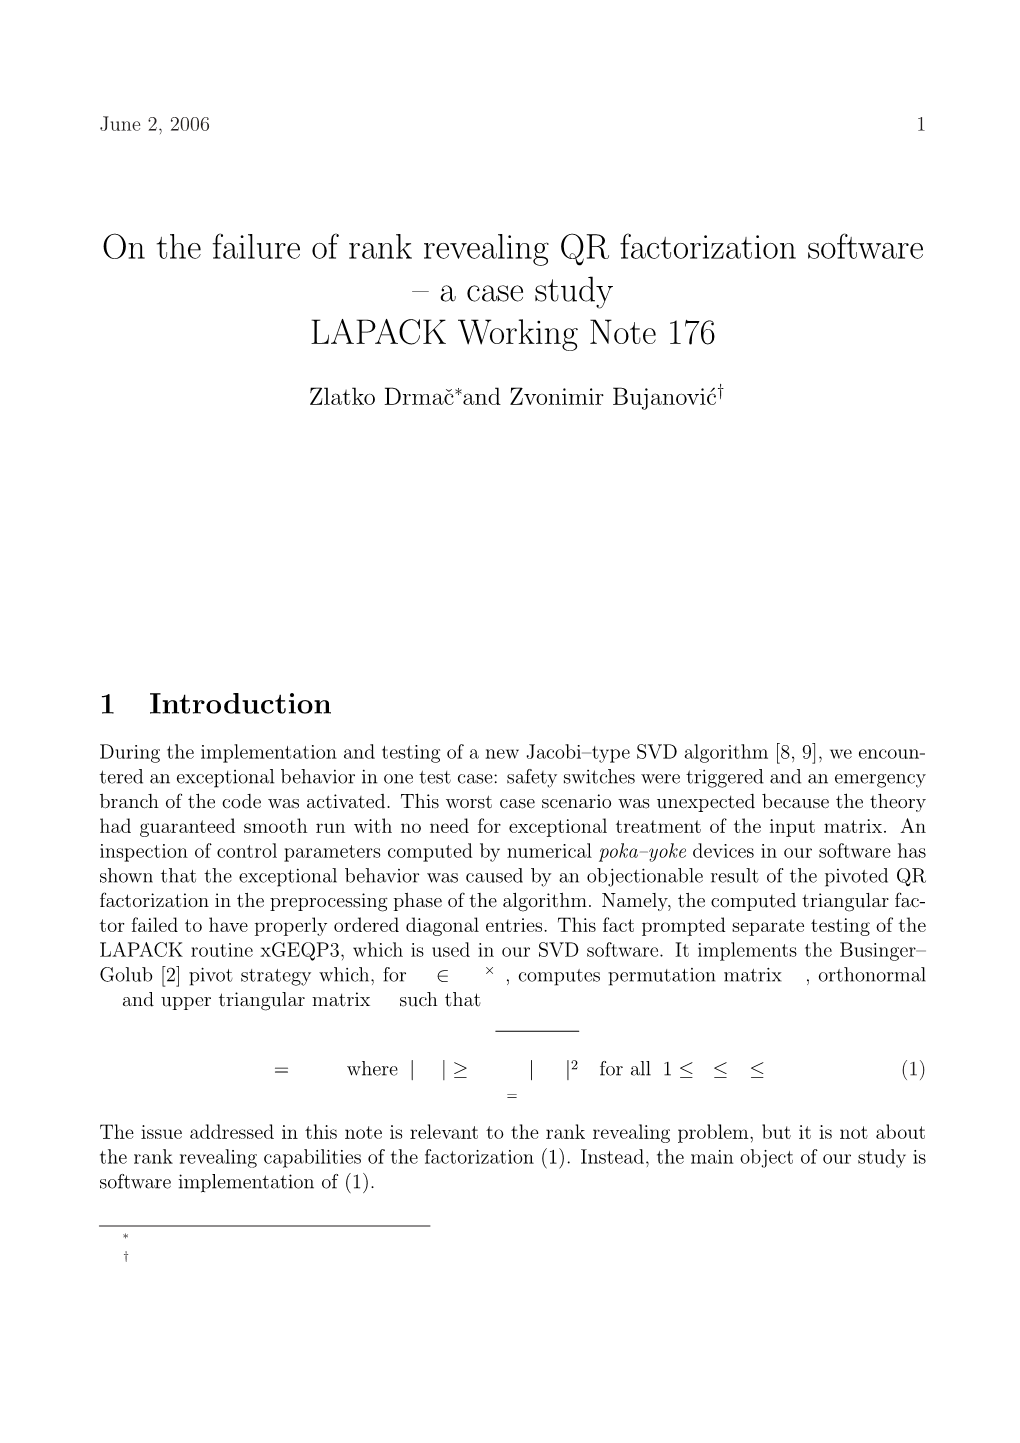 On the Failure of Rank Revealing QR Factorization Software – a Case Study LAPACK Working Note 176